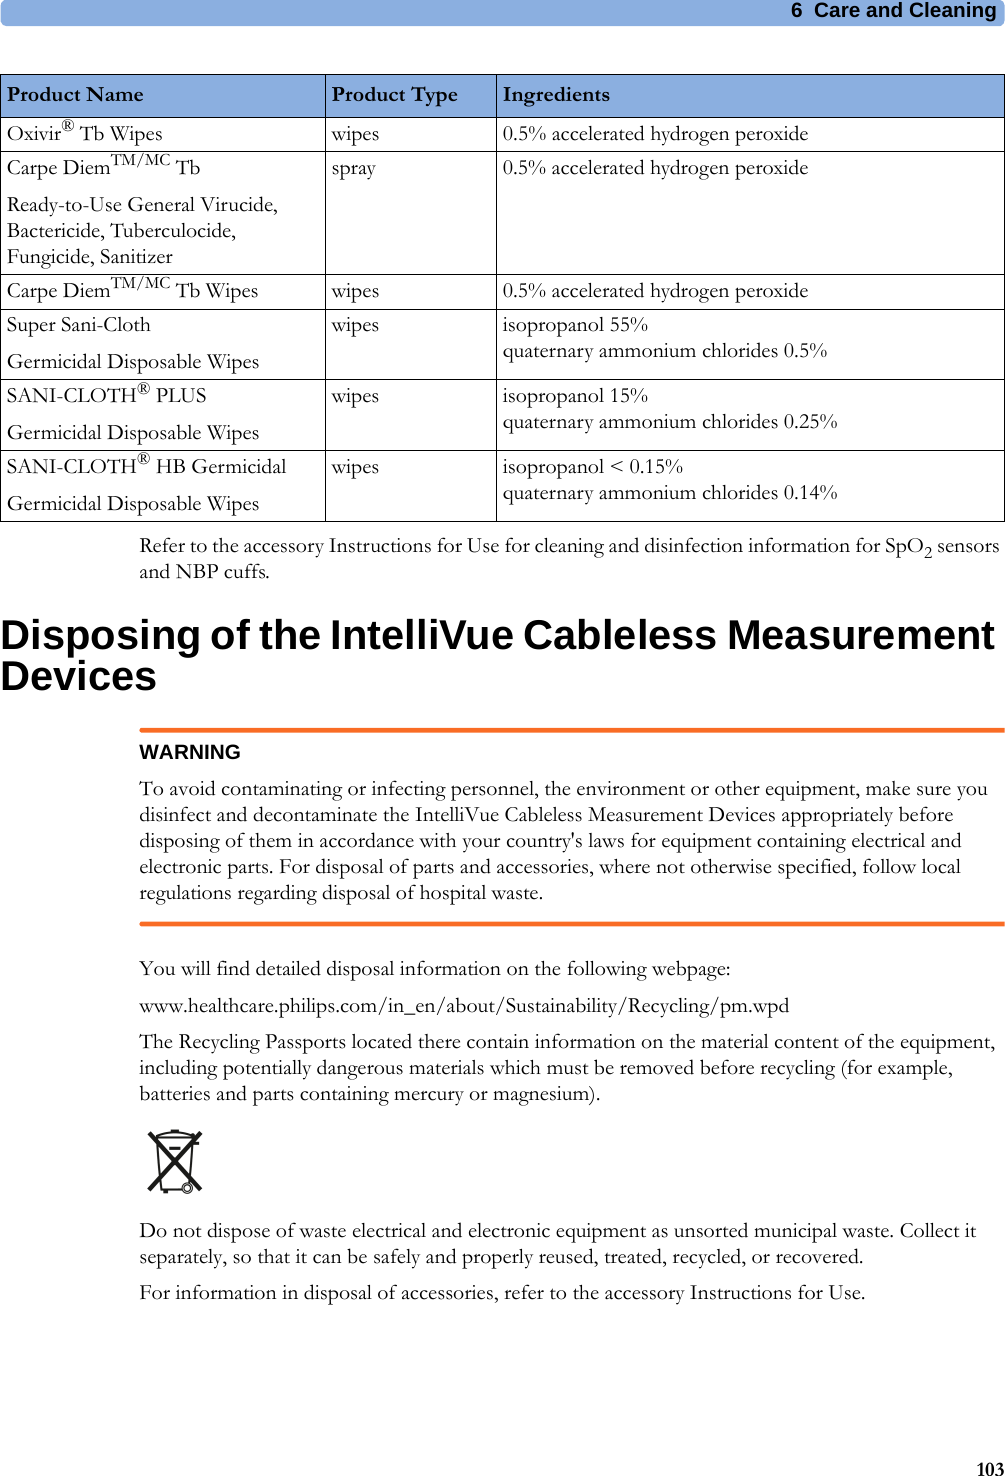 6 Care and Cleaning103Refer to the accessory Instructions for Use for cleaning and disinfection information for SpO2 sensors and NBP cuffs.Disposing of the IntelliVue Cableless Measurement DevicesWARNINGTo avoid contaminating or infecting personnel, the environment or other equipment, make sure you disinfect and decontaminate the IntelliVue Cableless Measurement Devices appropriately before disposing of them in accordance with your country&apos;s laws for equipment containing electrical and electronic parts. For disposal of parts and accessories, where not otherwise specified, follow local regulations regarding disposal of hospital waste.You will find detailed disposal information on the following webpage:www.healthcare.philips.com/in_en/about/Sustainability/Recycling/pm.wpdThe Recycling Passports located there contain information on the material content of the equipment, including potentially dangerous materials which must be removed before recycling (for example, batteries and parts containing mercury or magnesium).Do not dispose of waste electrical and electronic equipment as unsorted municipal waste. Collect it separately, so that it can be safely and properly reused, treated, recycled, or recovered.For information in disposal of accessories, refer to the accessory Instructions for Use.Oxivir® Tb Wipes wipes 0.5% accelerated hydrogen peroxideCarpe DiemTM/MC TbReady-to-Use General Virucide, Bactericide, Tuberculocide, Fungicide, Sanitizerspray 0.5% accelerated hydrogen peroxideCarpe DiemTM/MC Tb Wipes wipes 0.5% accelerated hydrogen peroxideSuper Sani-ClothGermicidal Disposable Wipeswipes isopropanol 55%quaternary ammonium chlorides 0.5%SANI-CLOTH® PLUSGermicidal Disposable Wipeswipes isopropanol 15%quaternary ammonium chlorides 0.25%SANI-CLOTH® HB GermicidalGermicidal Disposable Wipeswipes isopropanol &lt; 0.15%quaternary ammonium chlorides 0.14%Product Name Product Type Ingredients